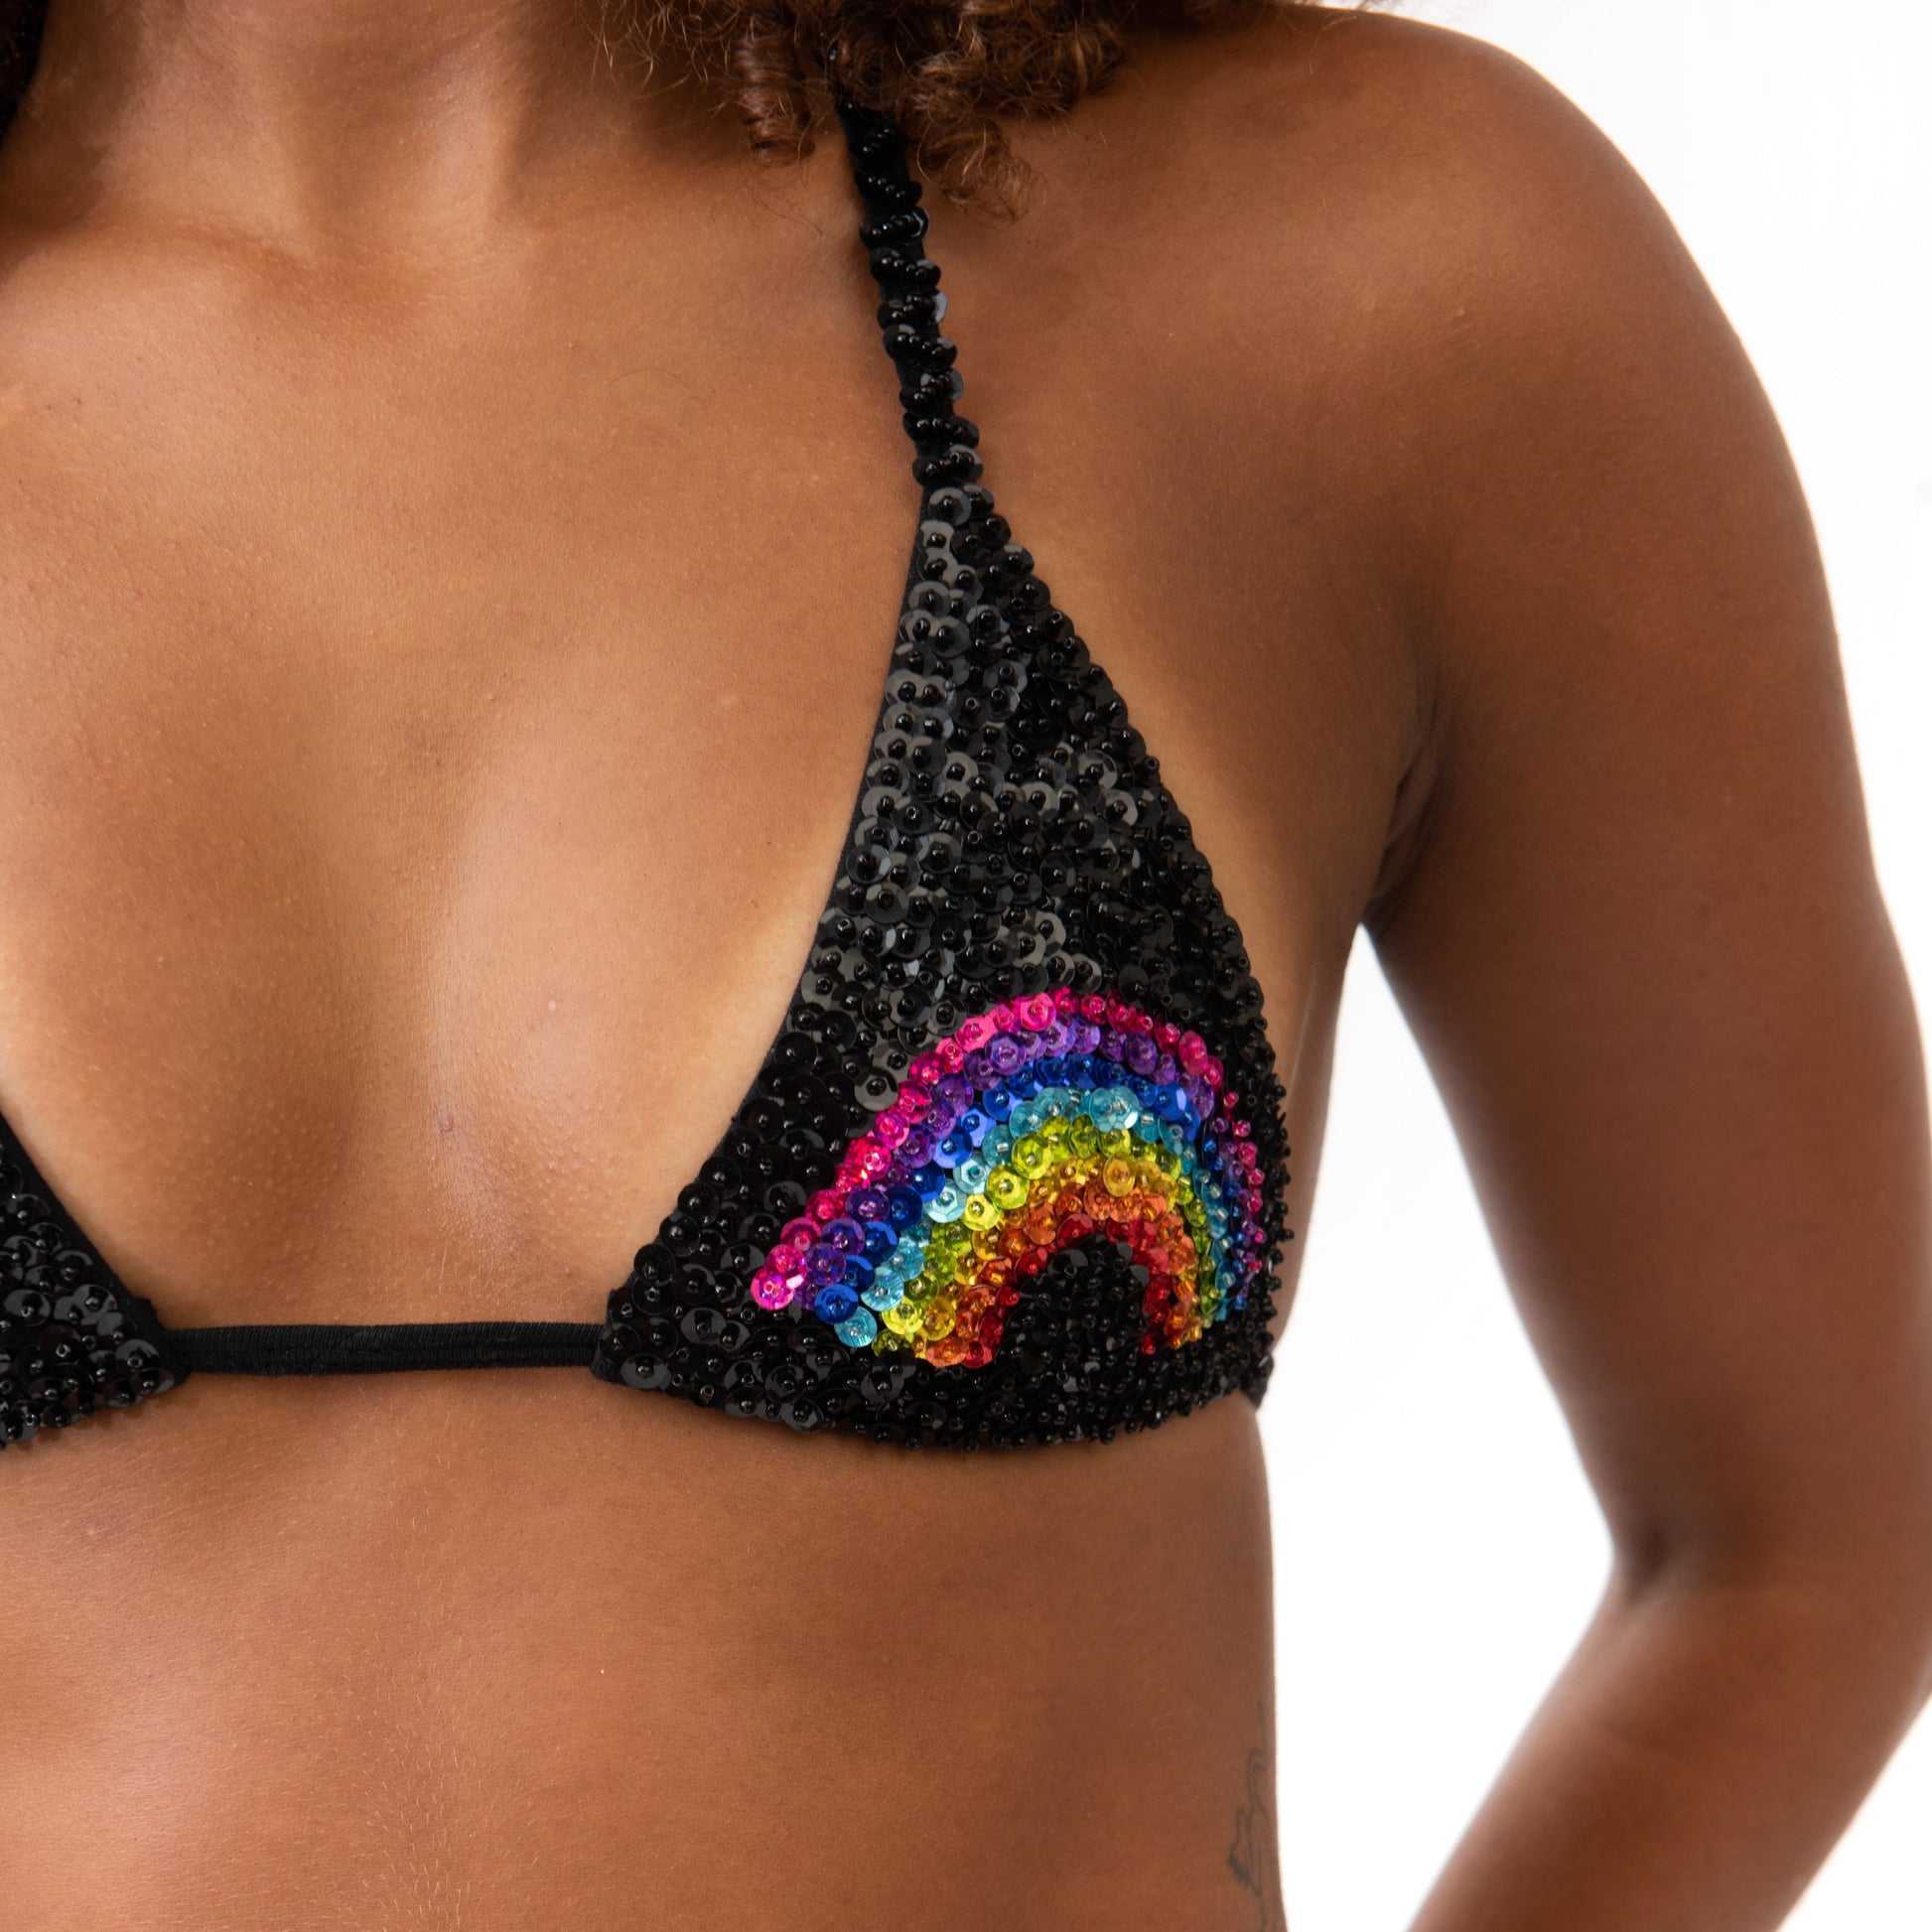 rainbow bikini triangle crop top for festival outfit to pair with matching hot pants 